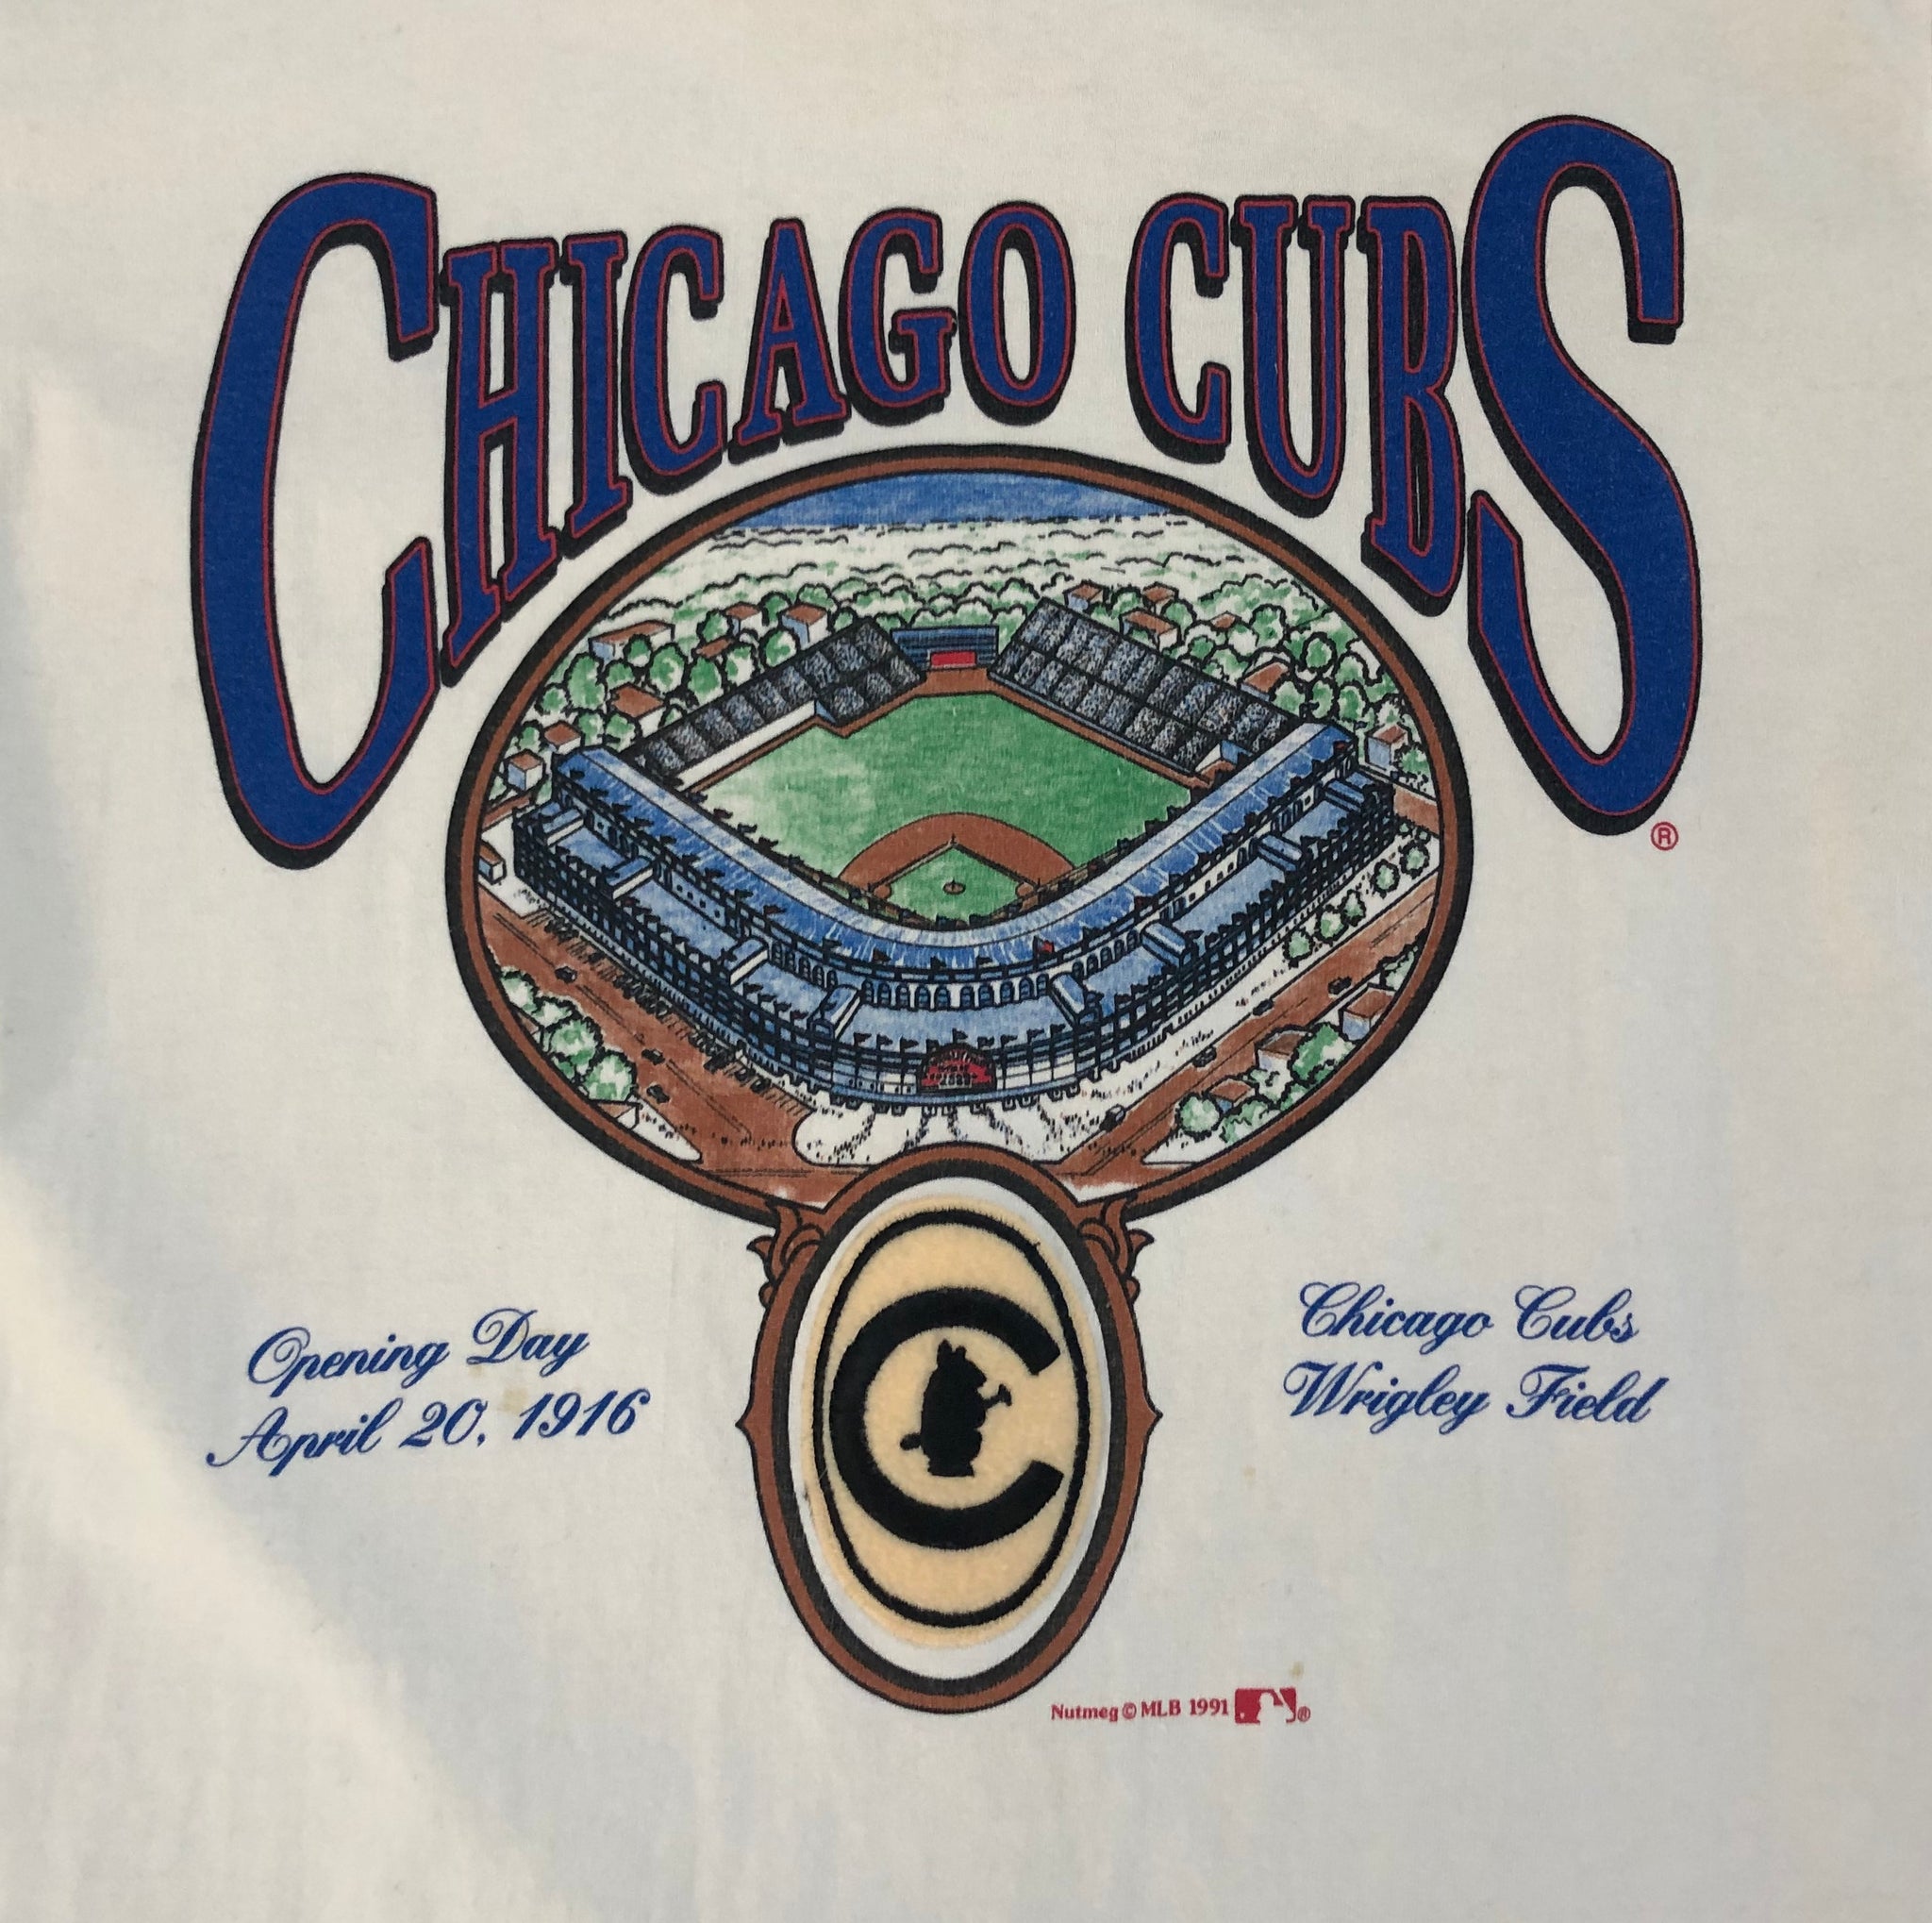 Vintage 1991 Chicago Cubs MLB T Shirt Made in USA